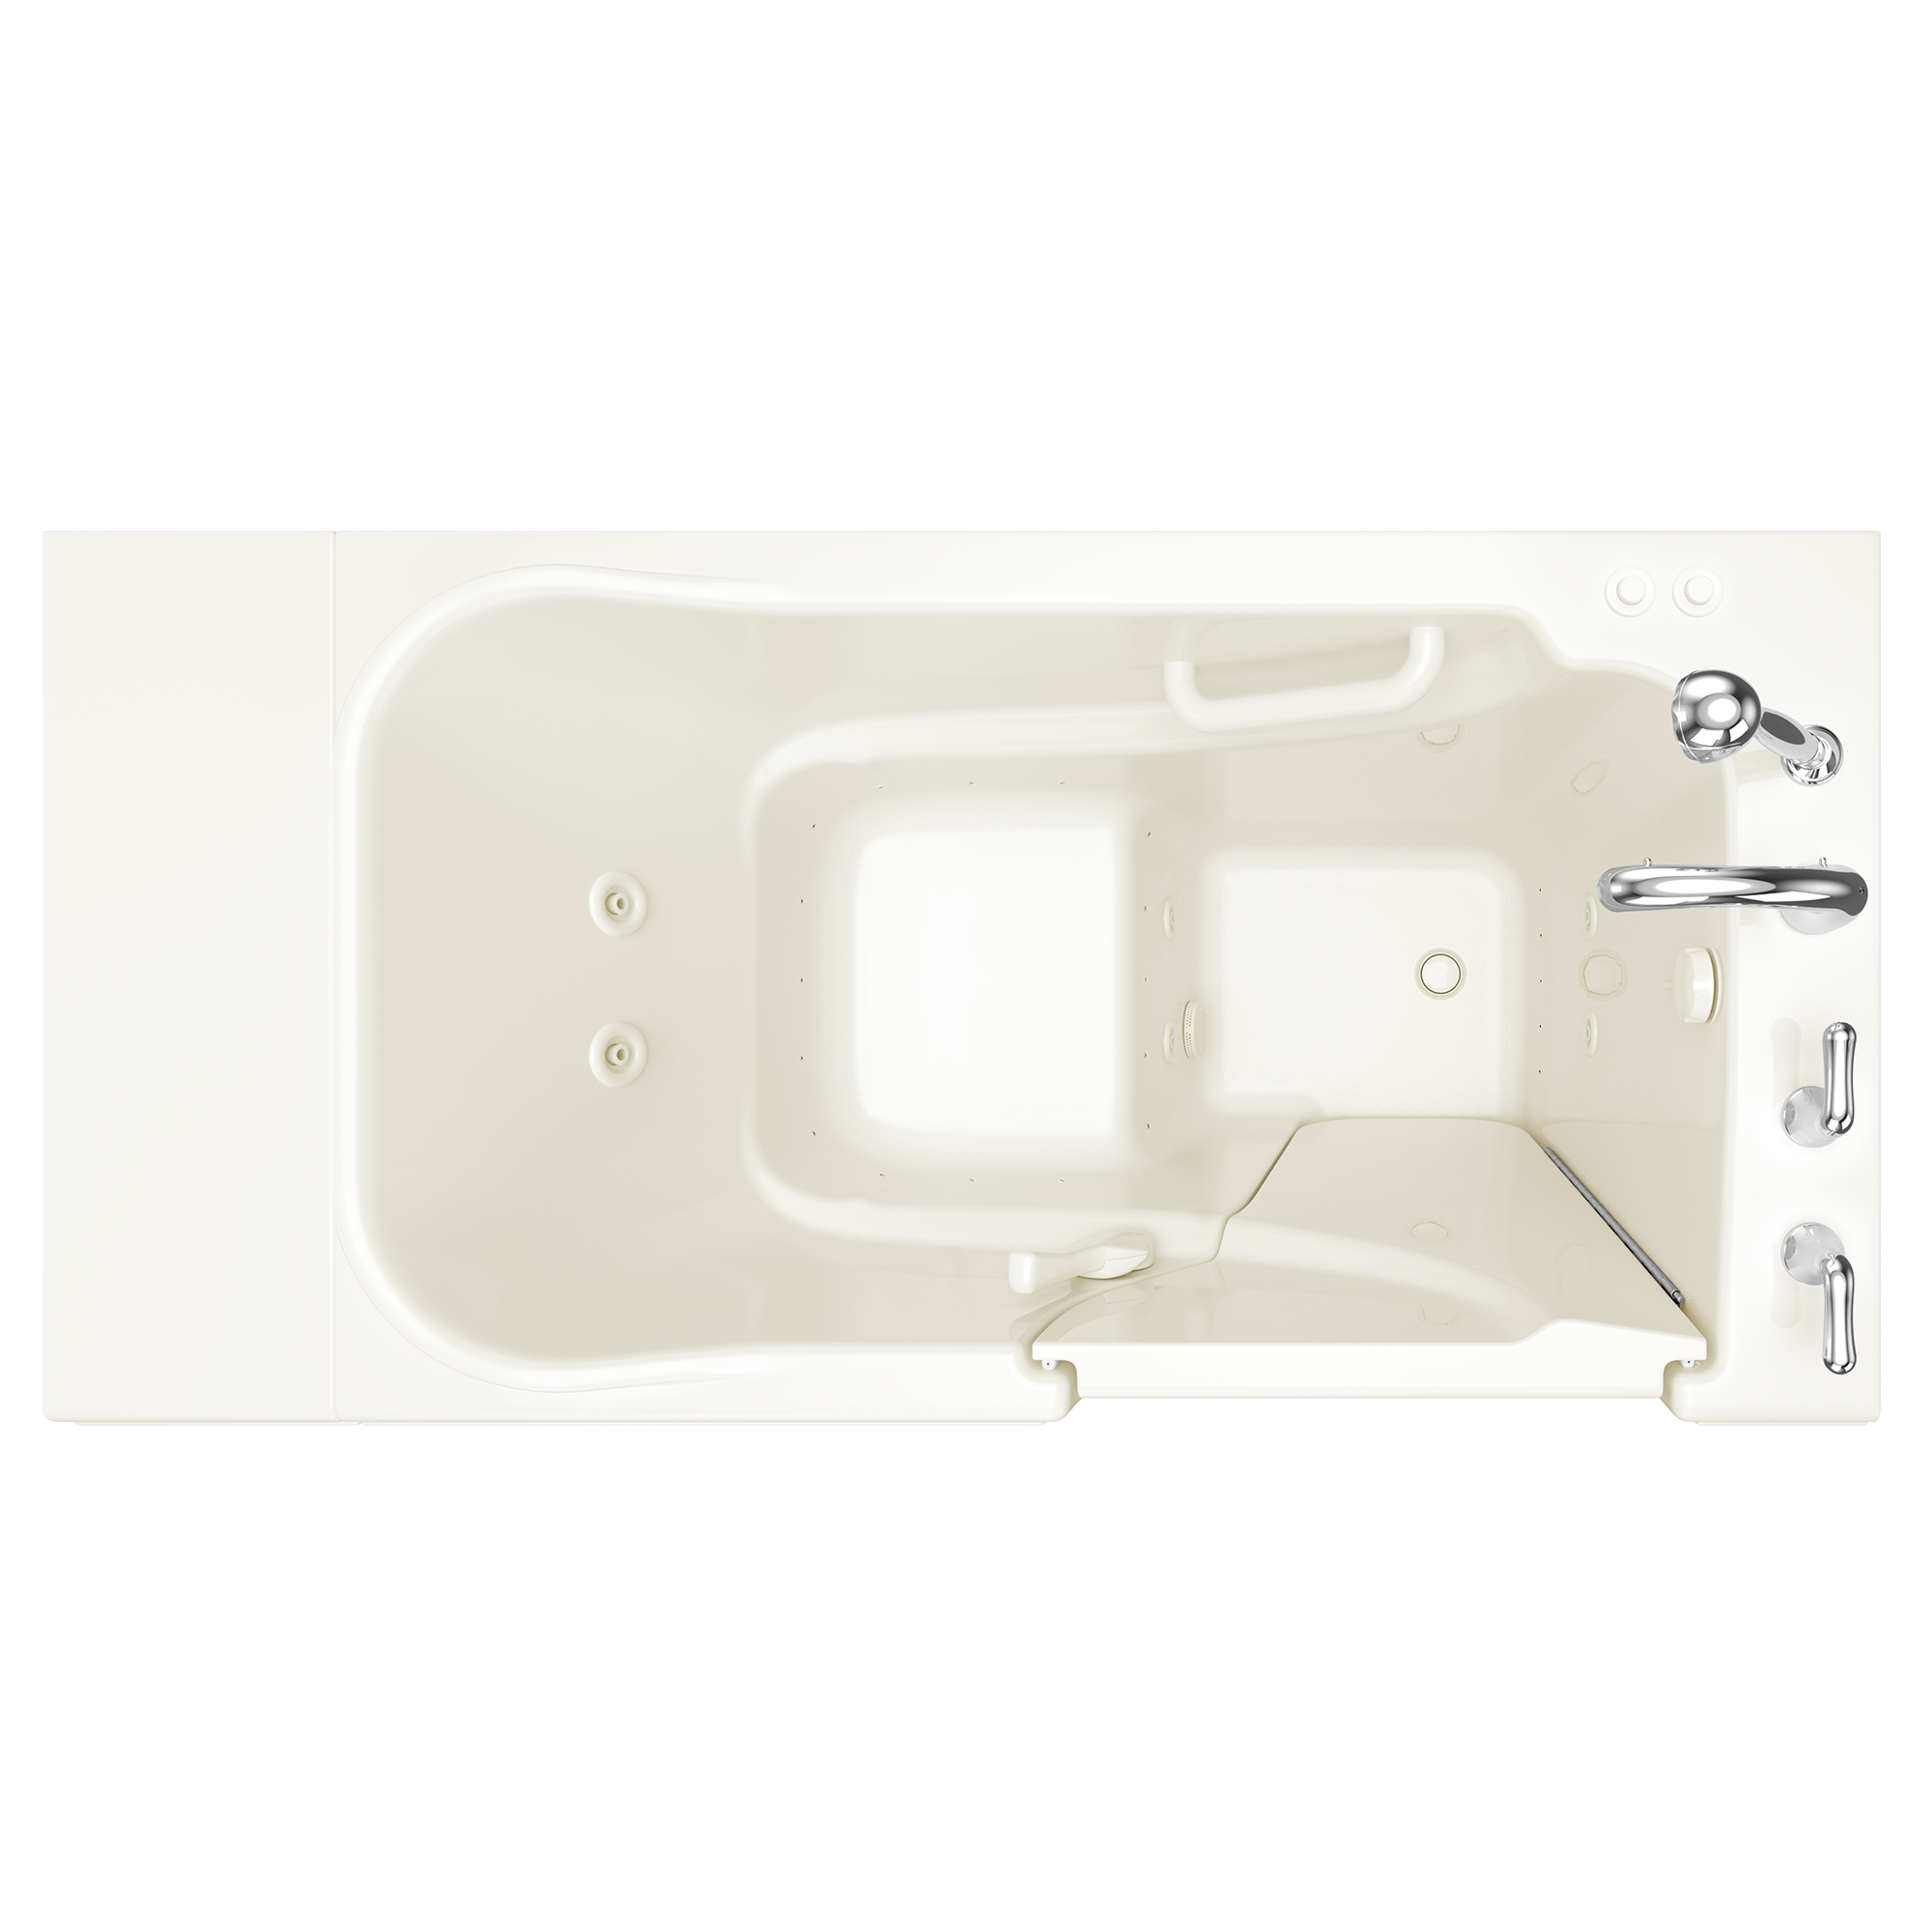 Gelcoat Entry Series 52 x 30 Inch Walk In Tub With Combination Air Spa and Whirlpool Systems - Right Hand Drain With Faucet BISCUIT